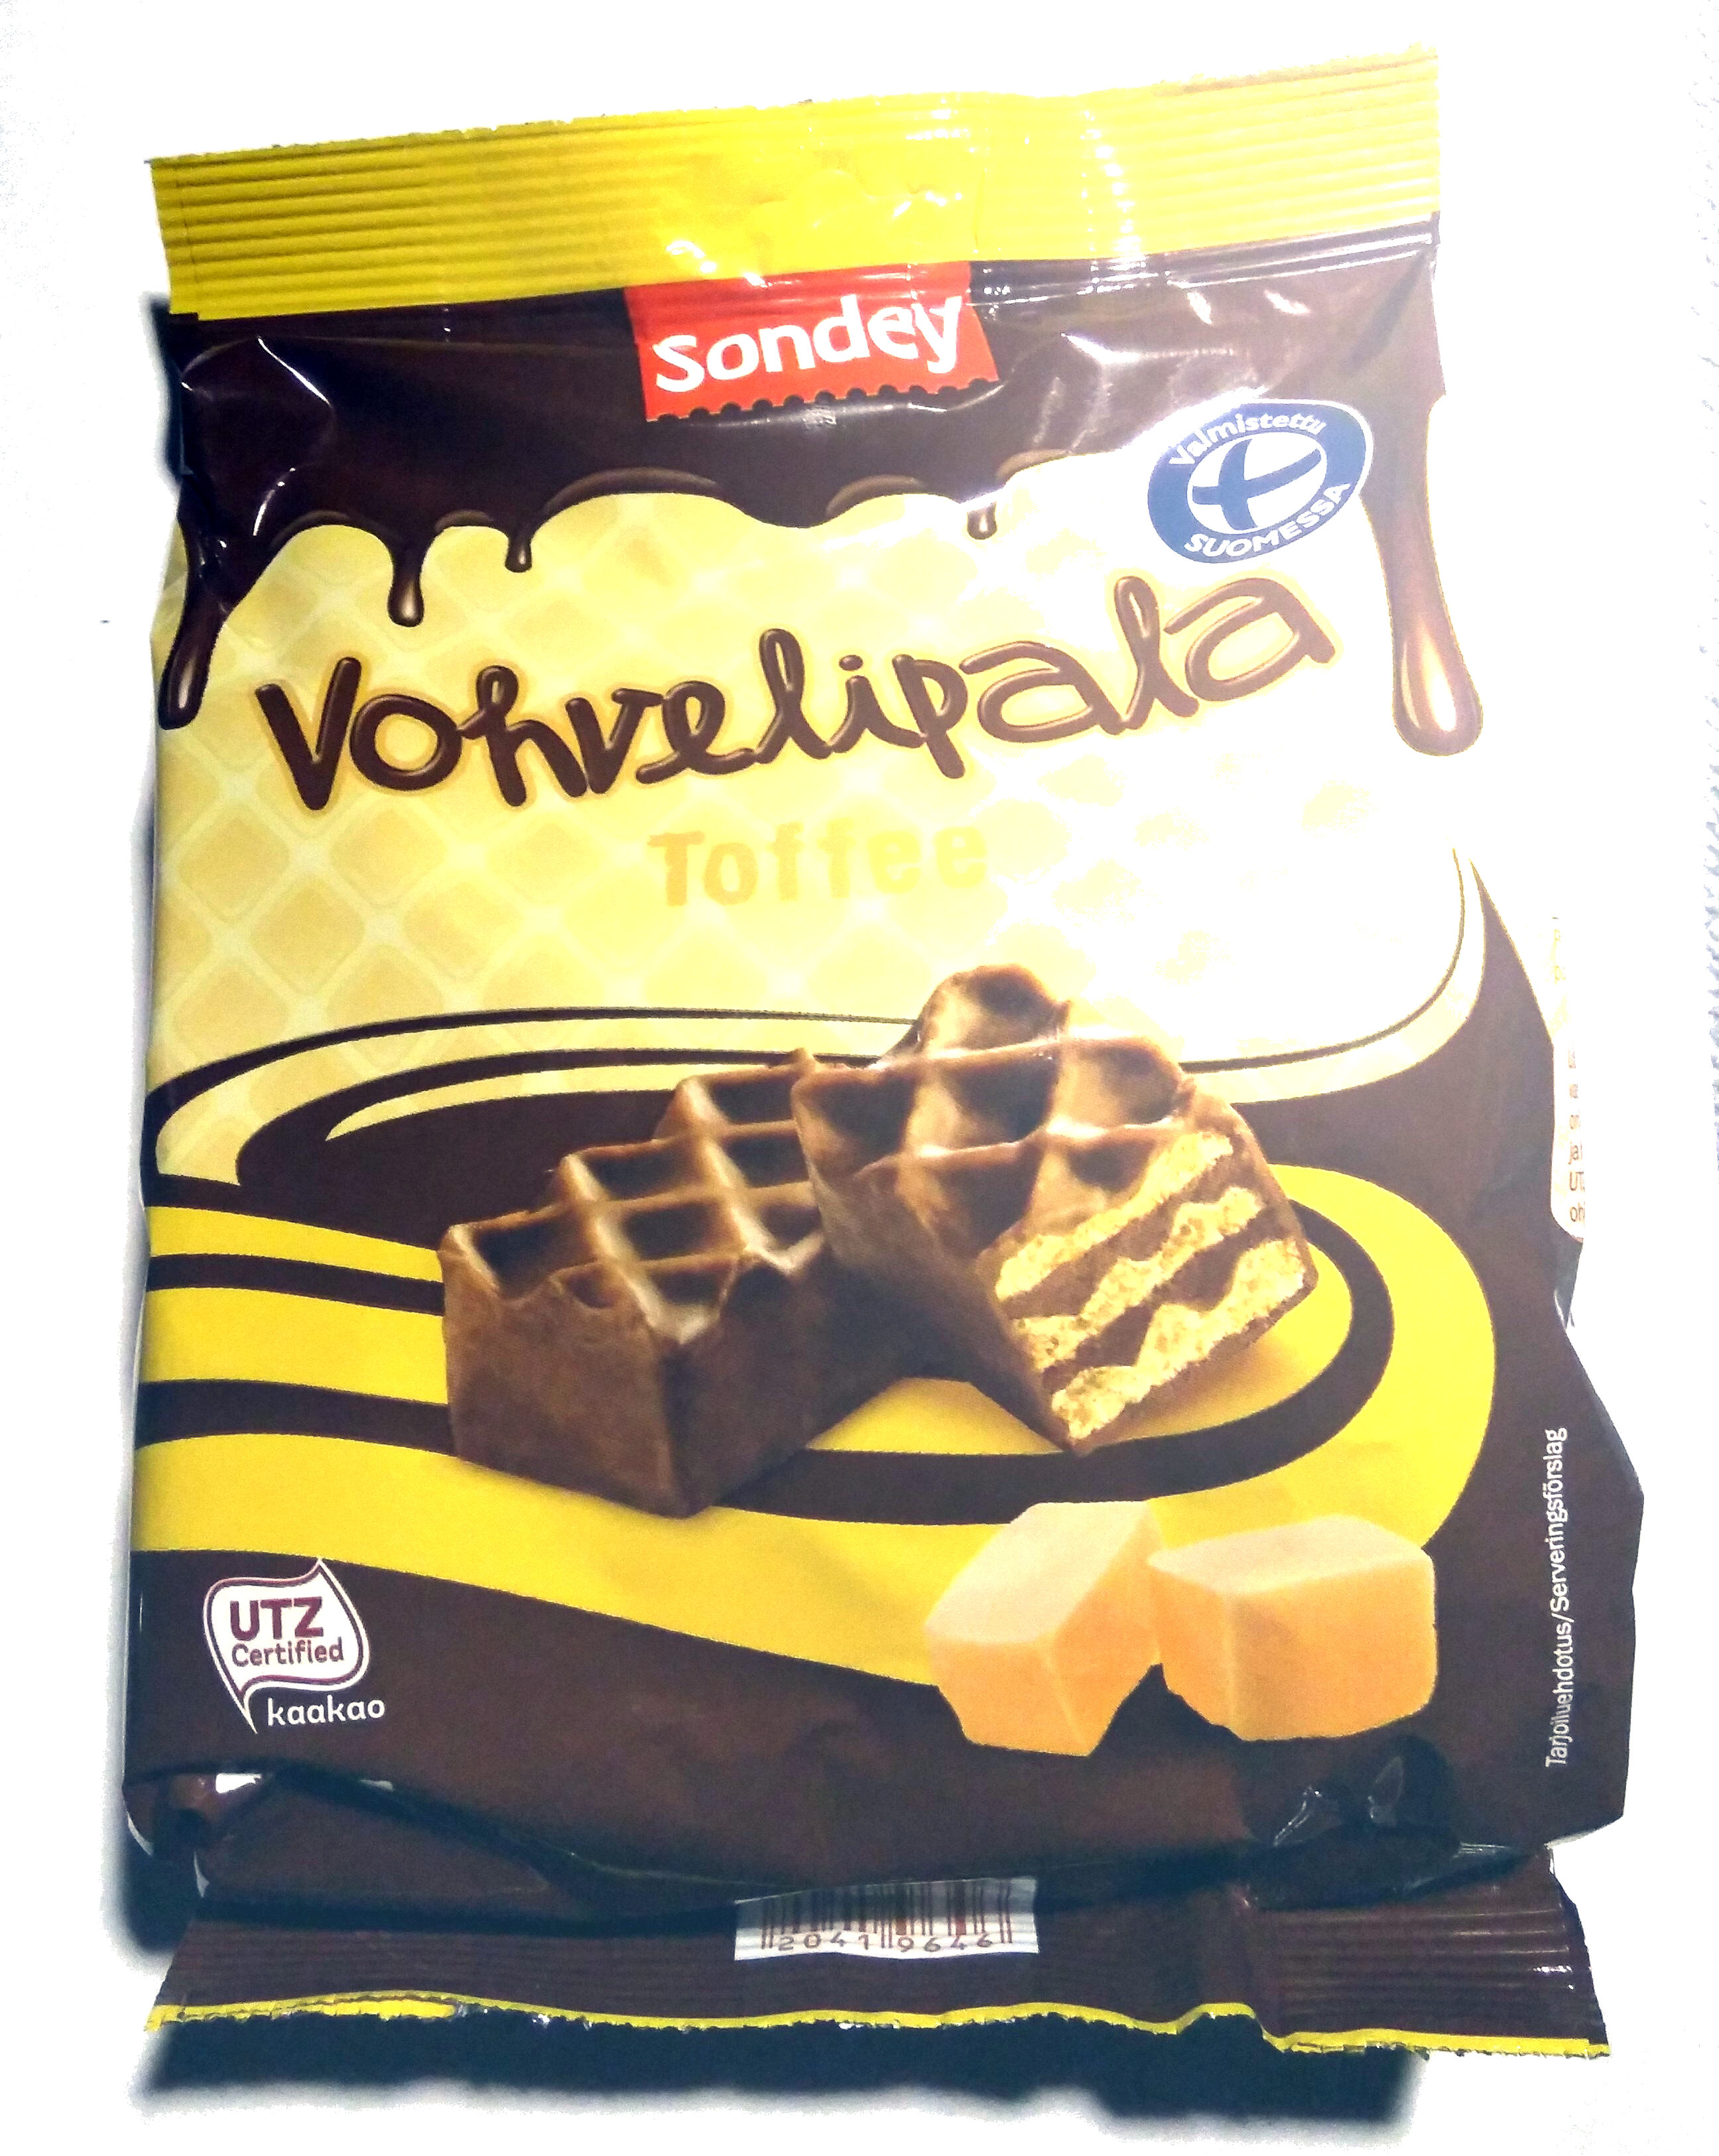 Vohvelipala Toffee - Product - fi